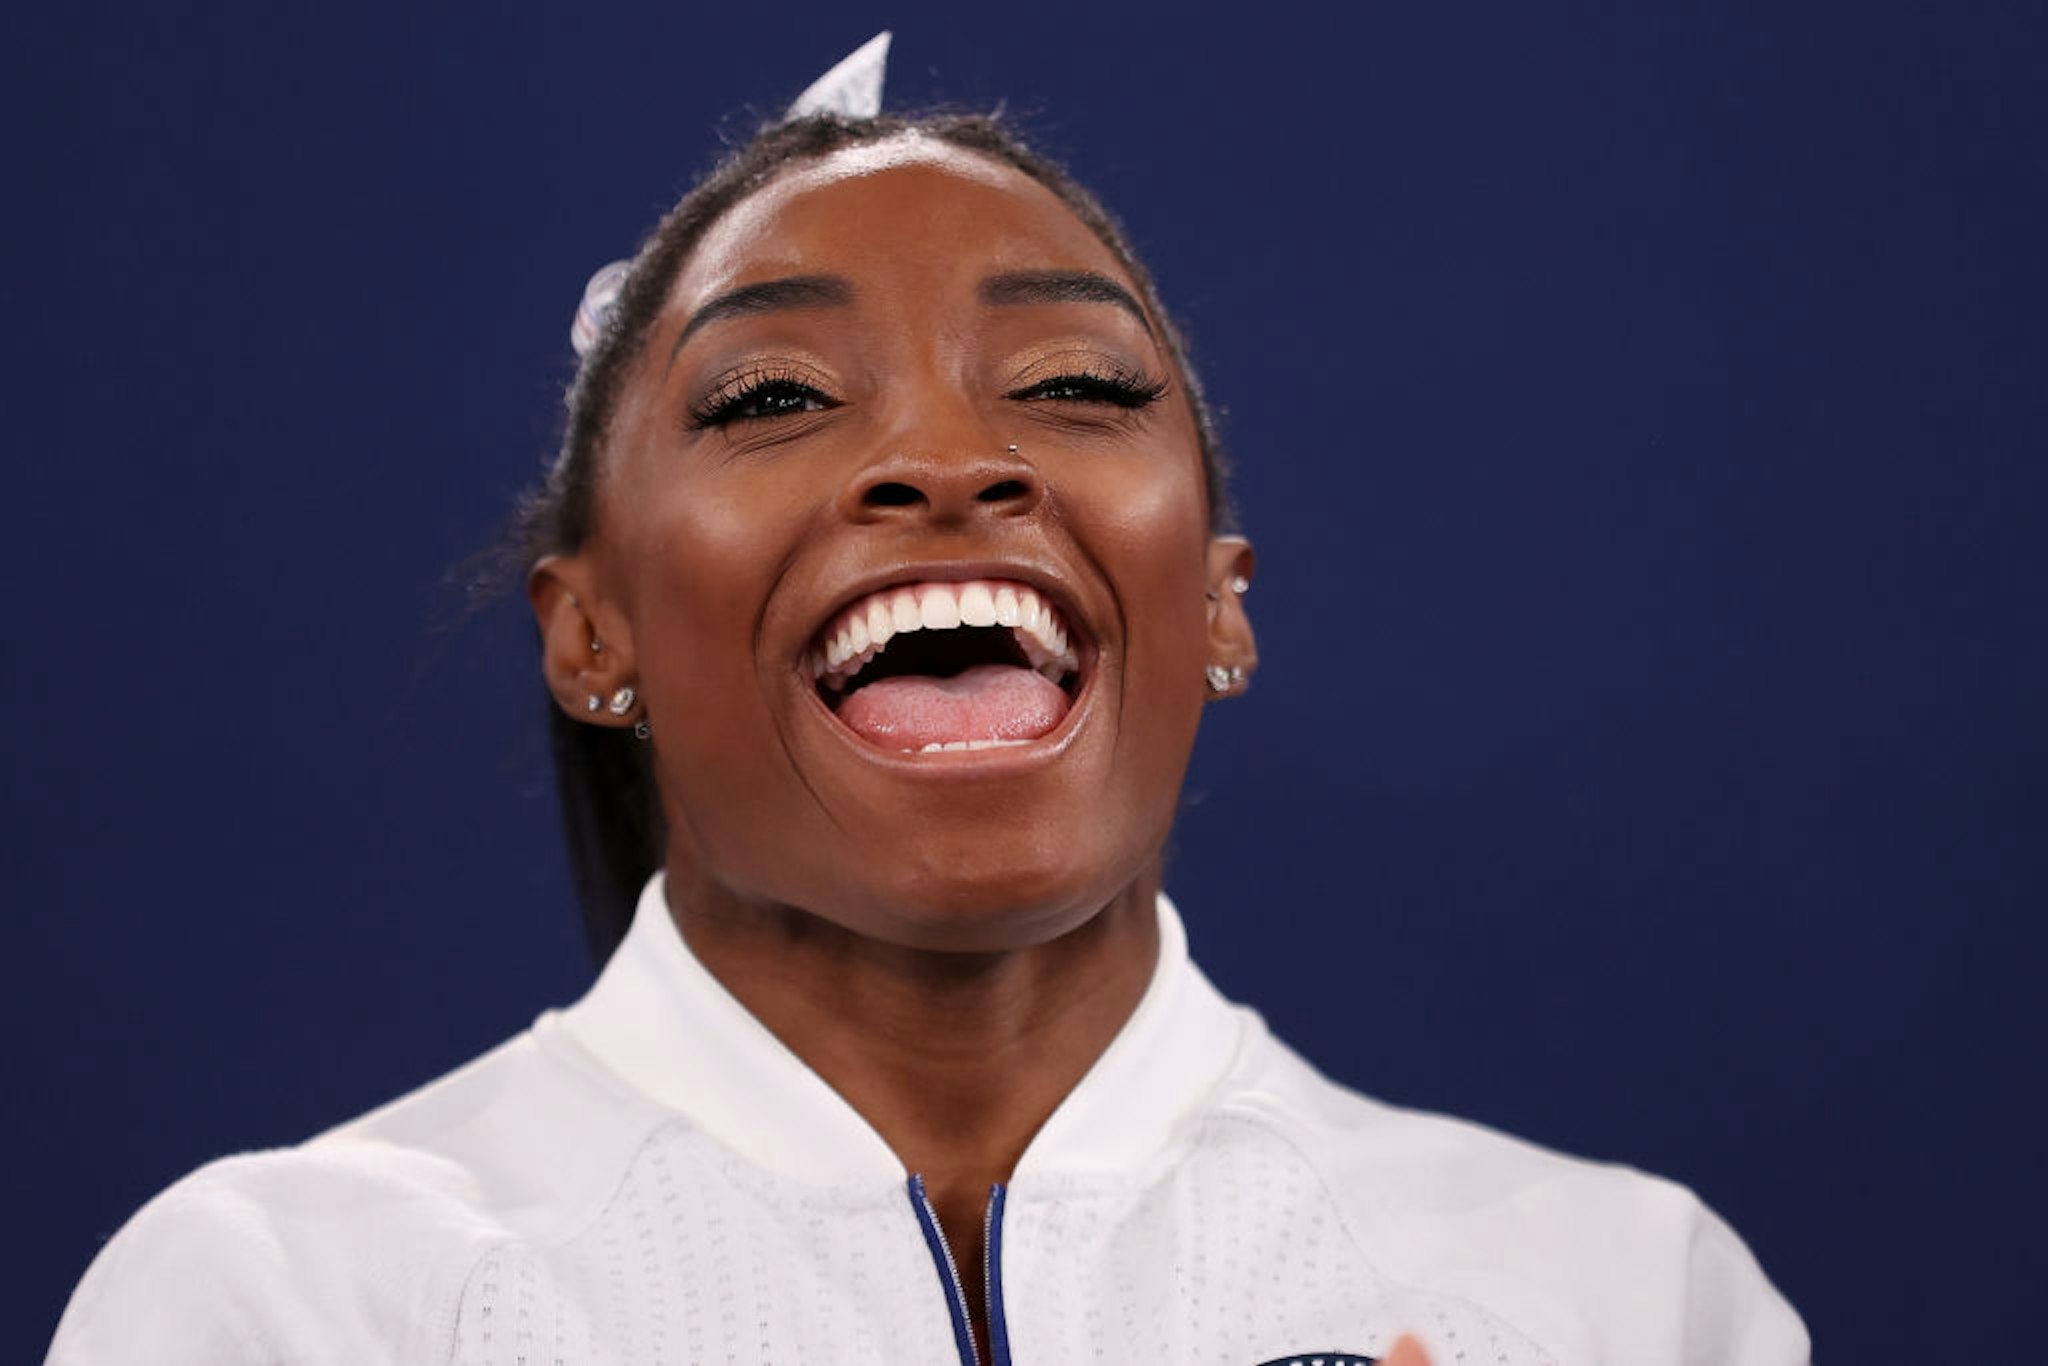 Simone Biles of Team United States reacts during the Women's Team Final on day four of the Tokyo 2020 Olympic Games at Ariake Gymnastics Centre on July 27, 2021 in Tokyo, Japan.